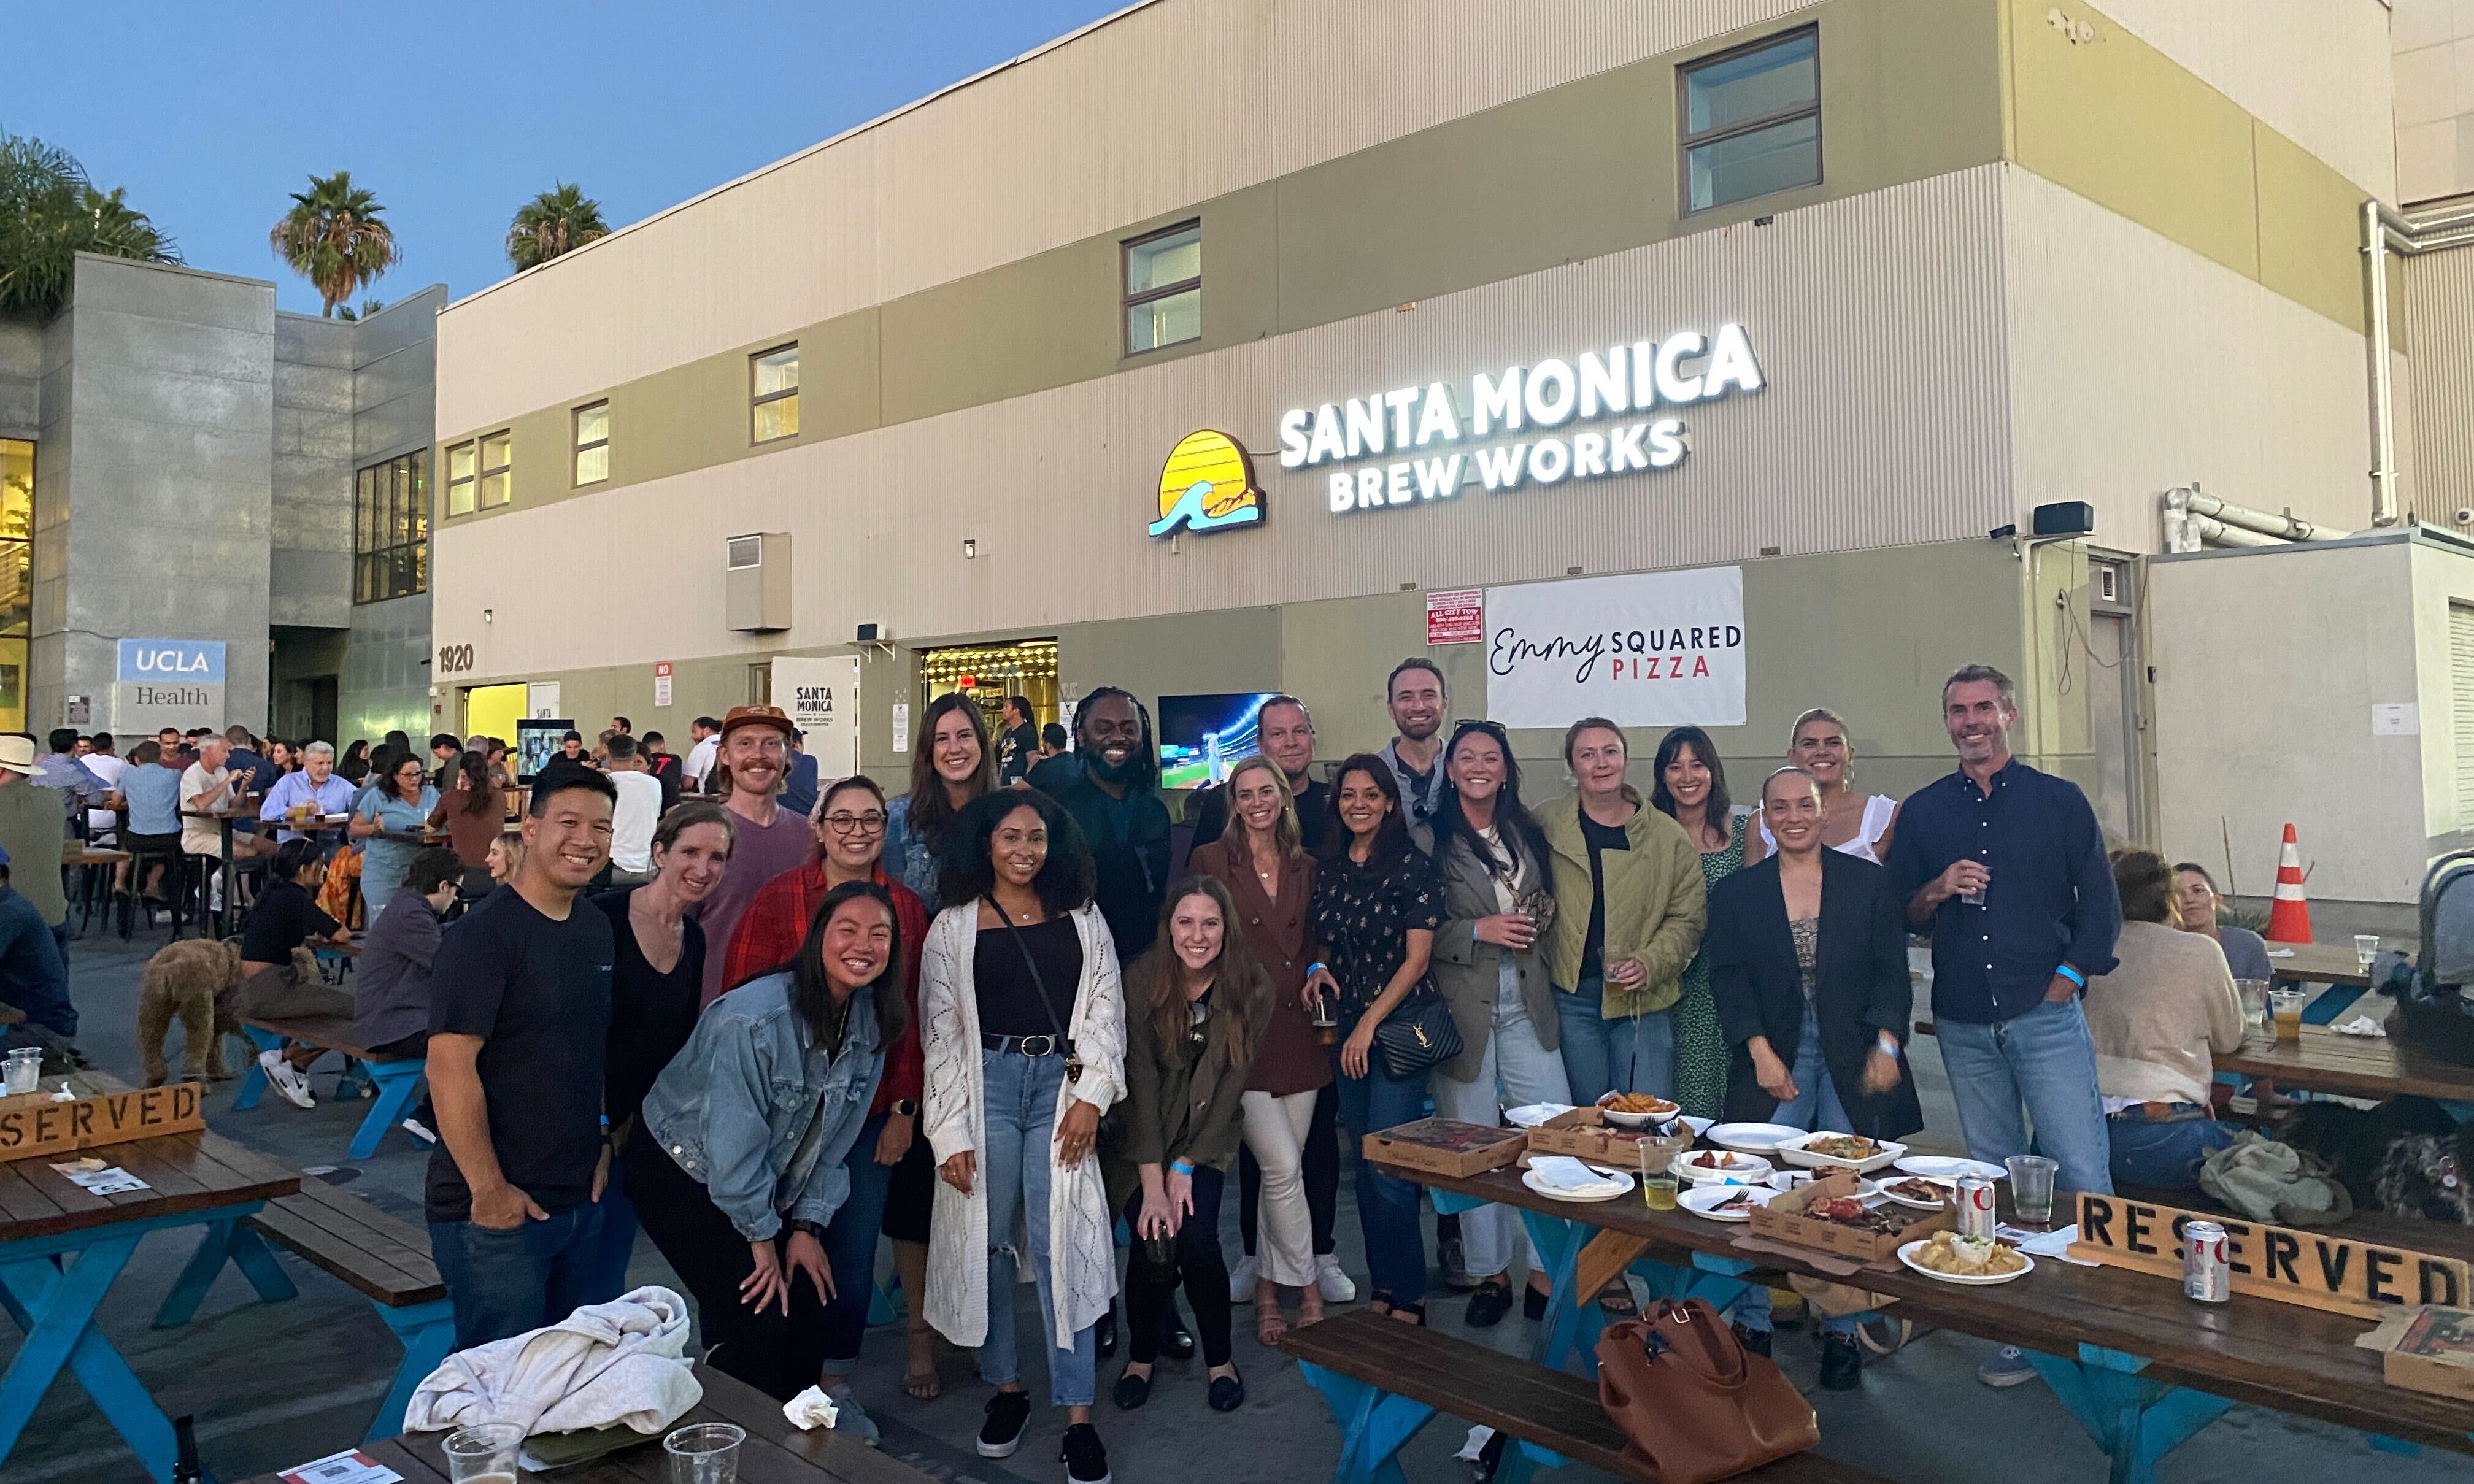 Team members gather at Santa Monica Brew Works for a happy hour gathering.